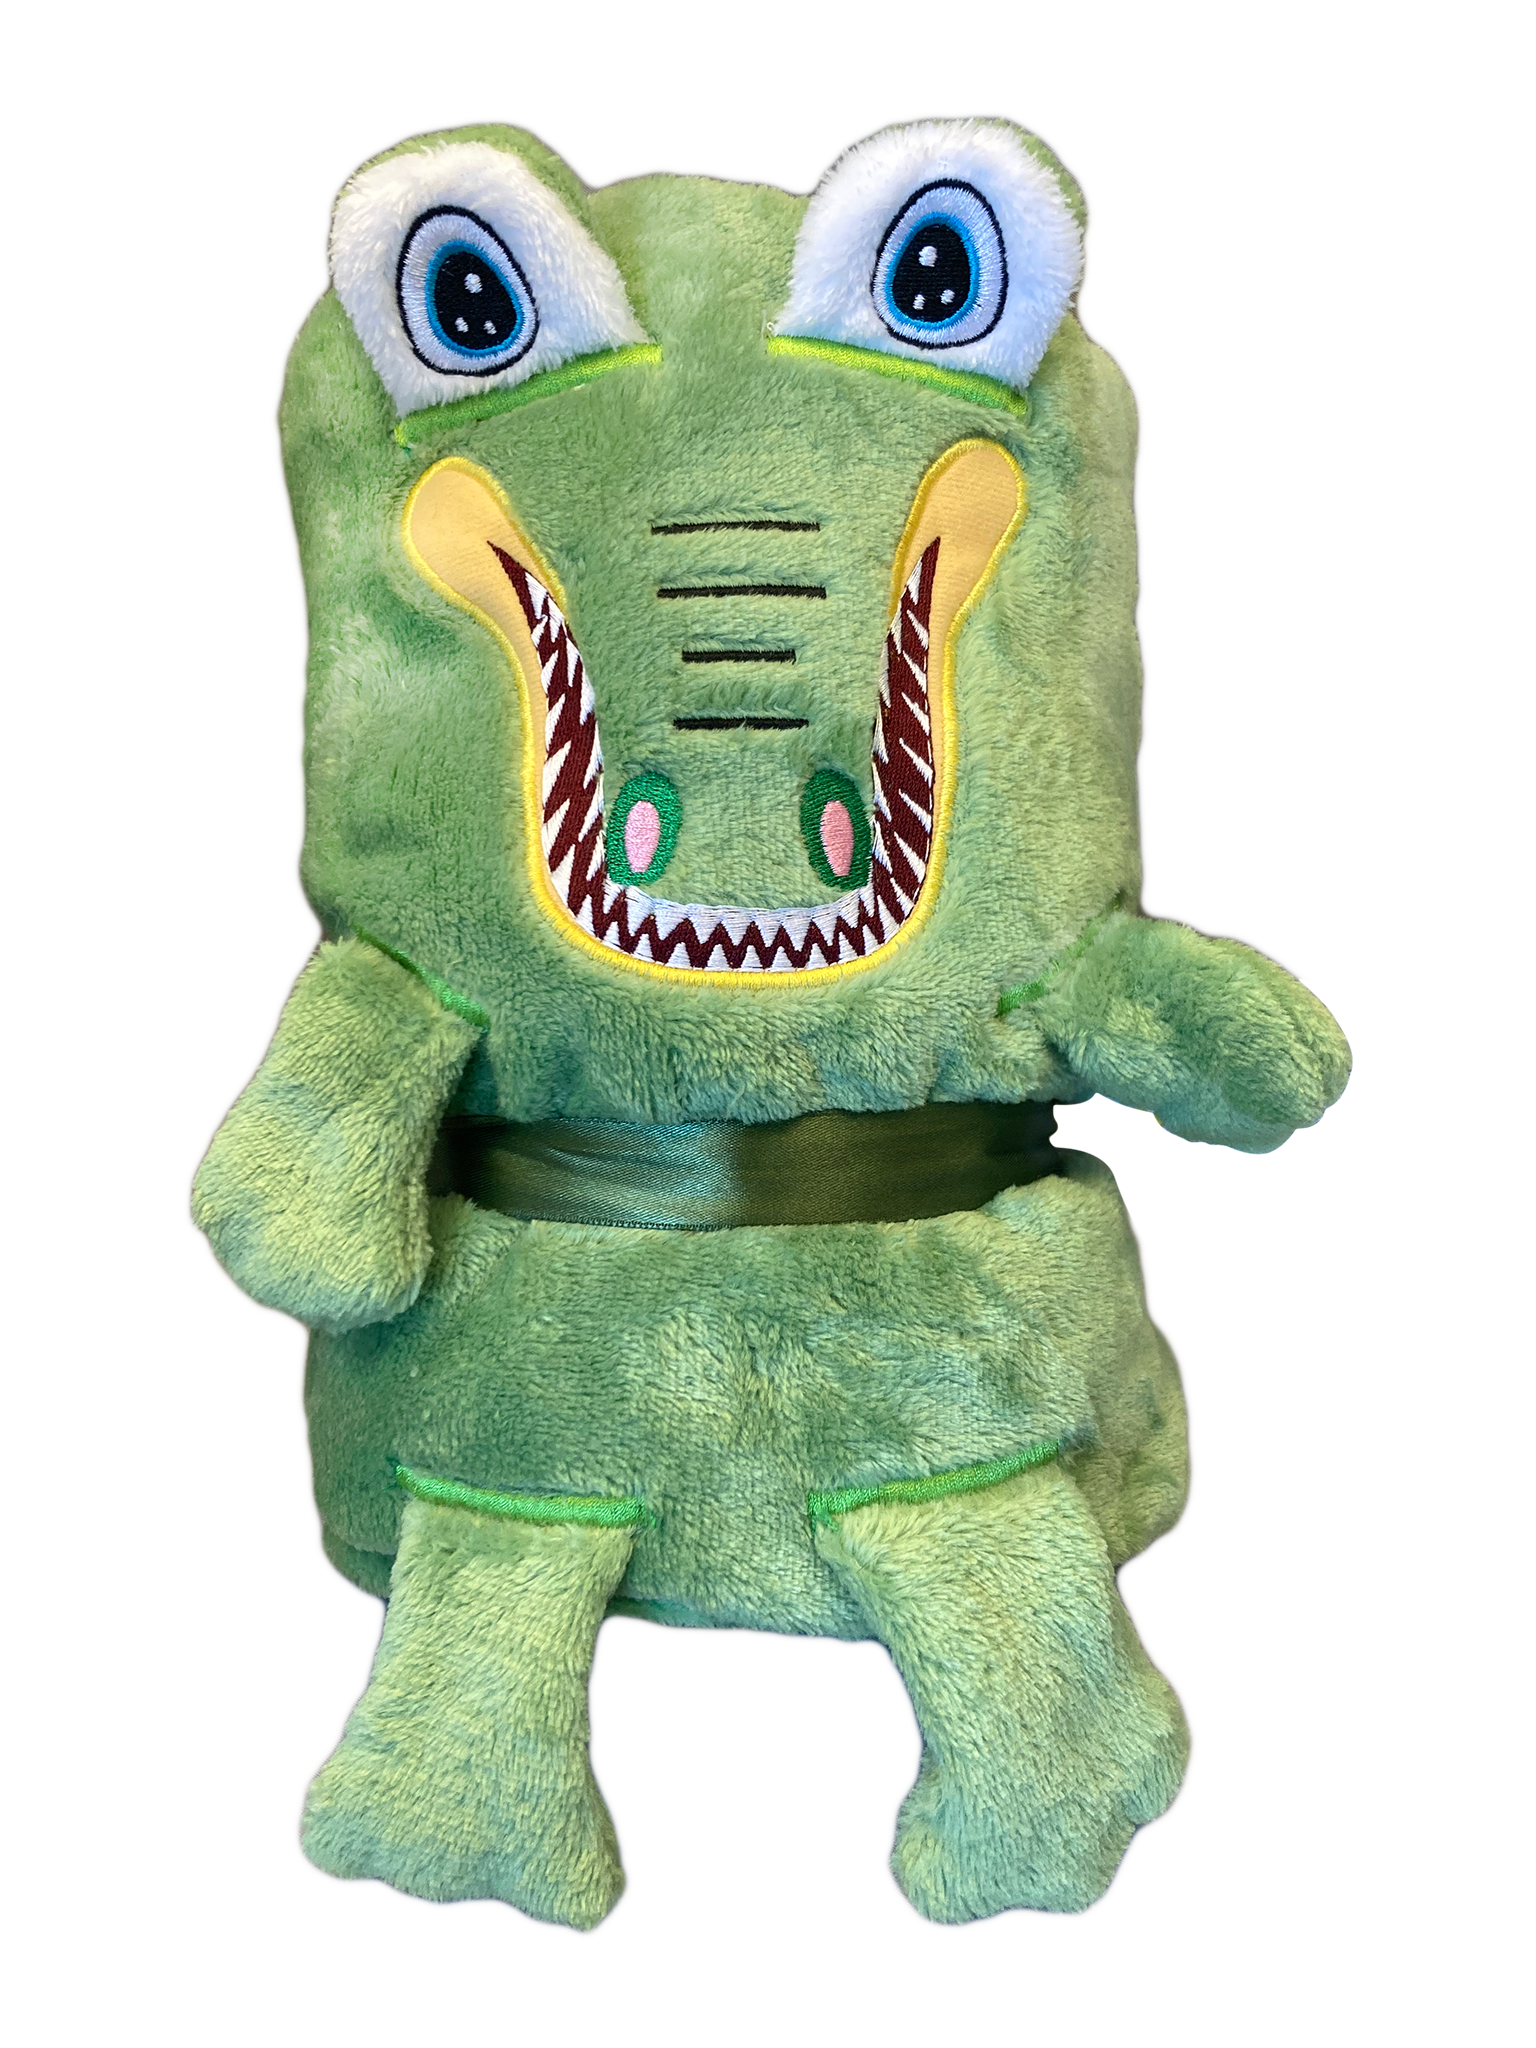 50” x 31” soft plush blanket with friendly embroidered Gator face